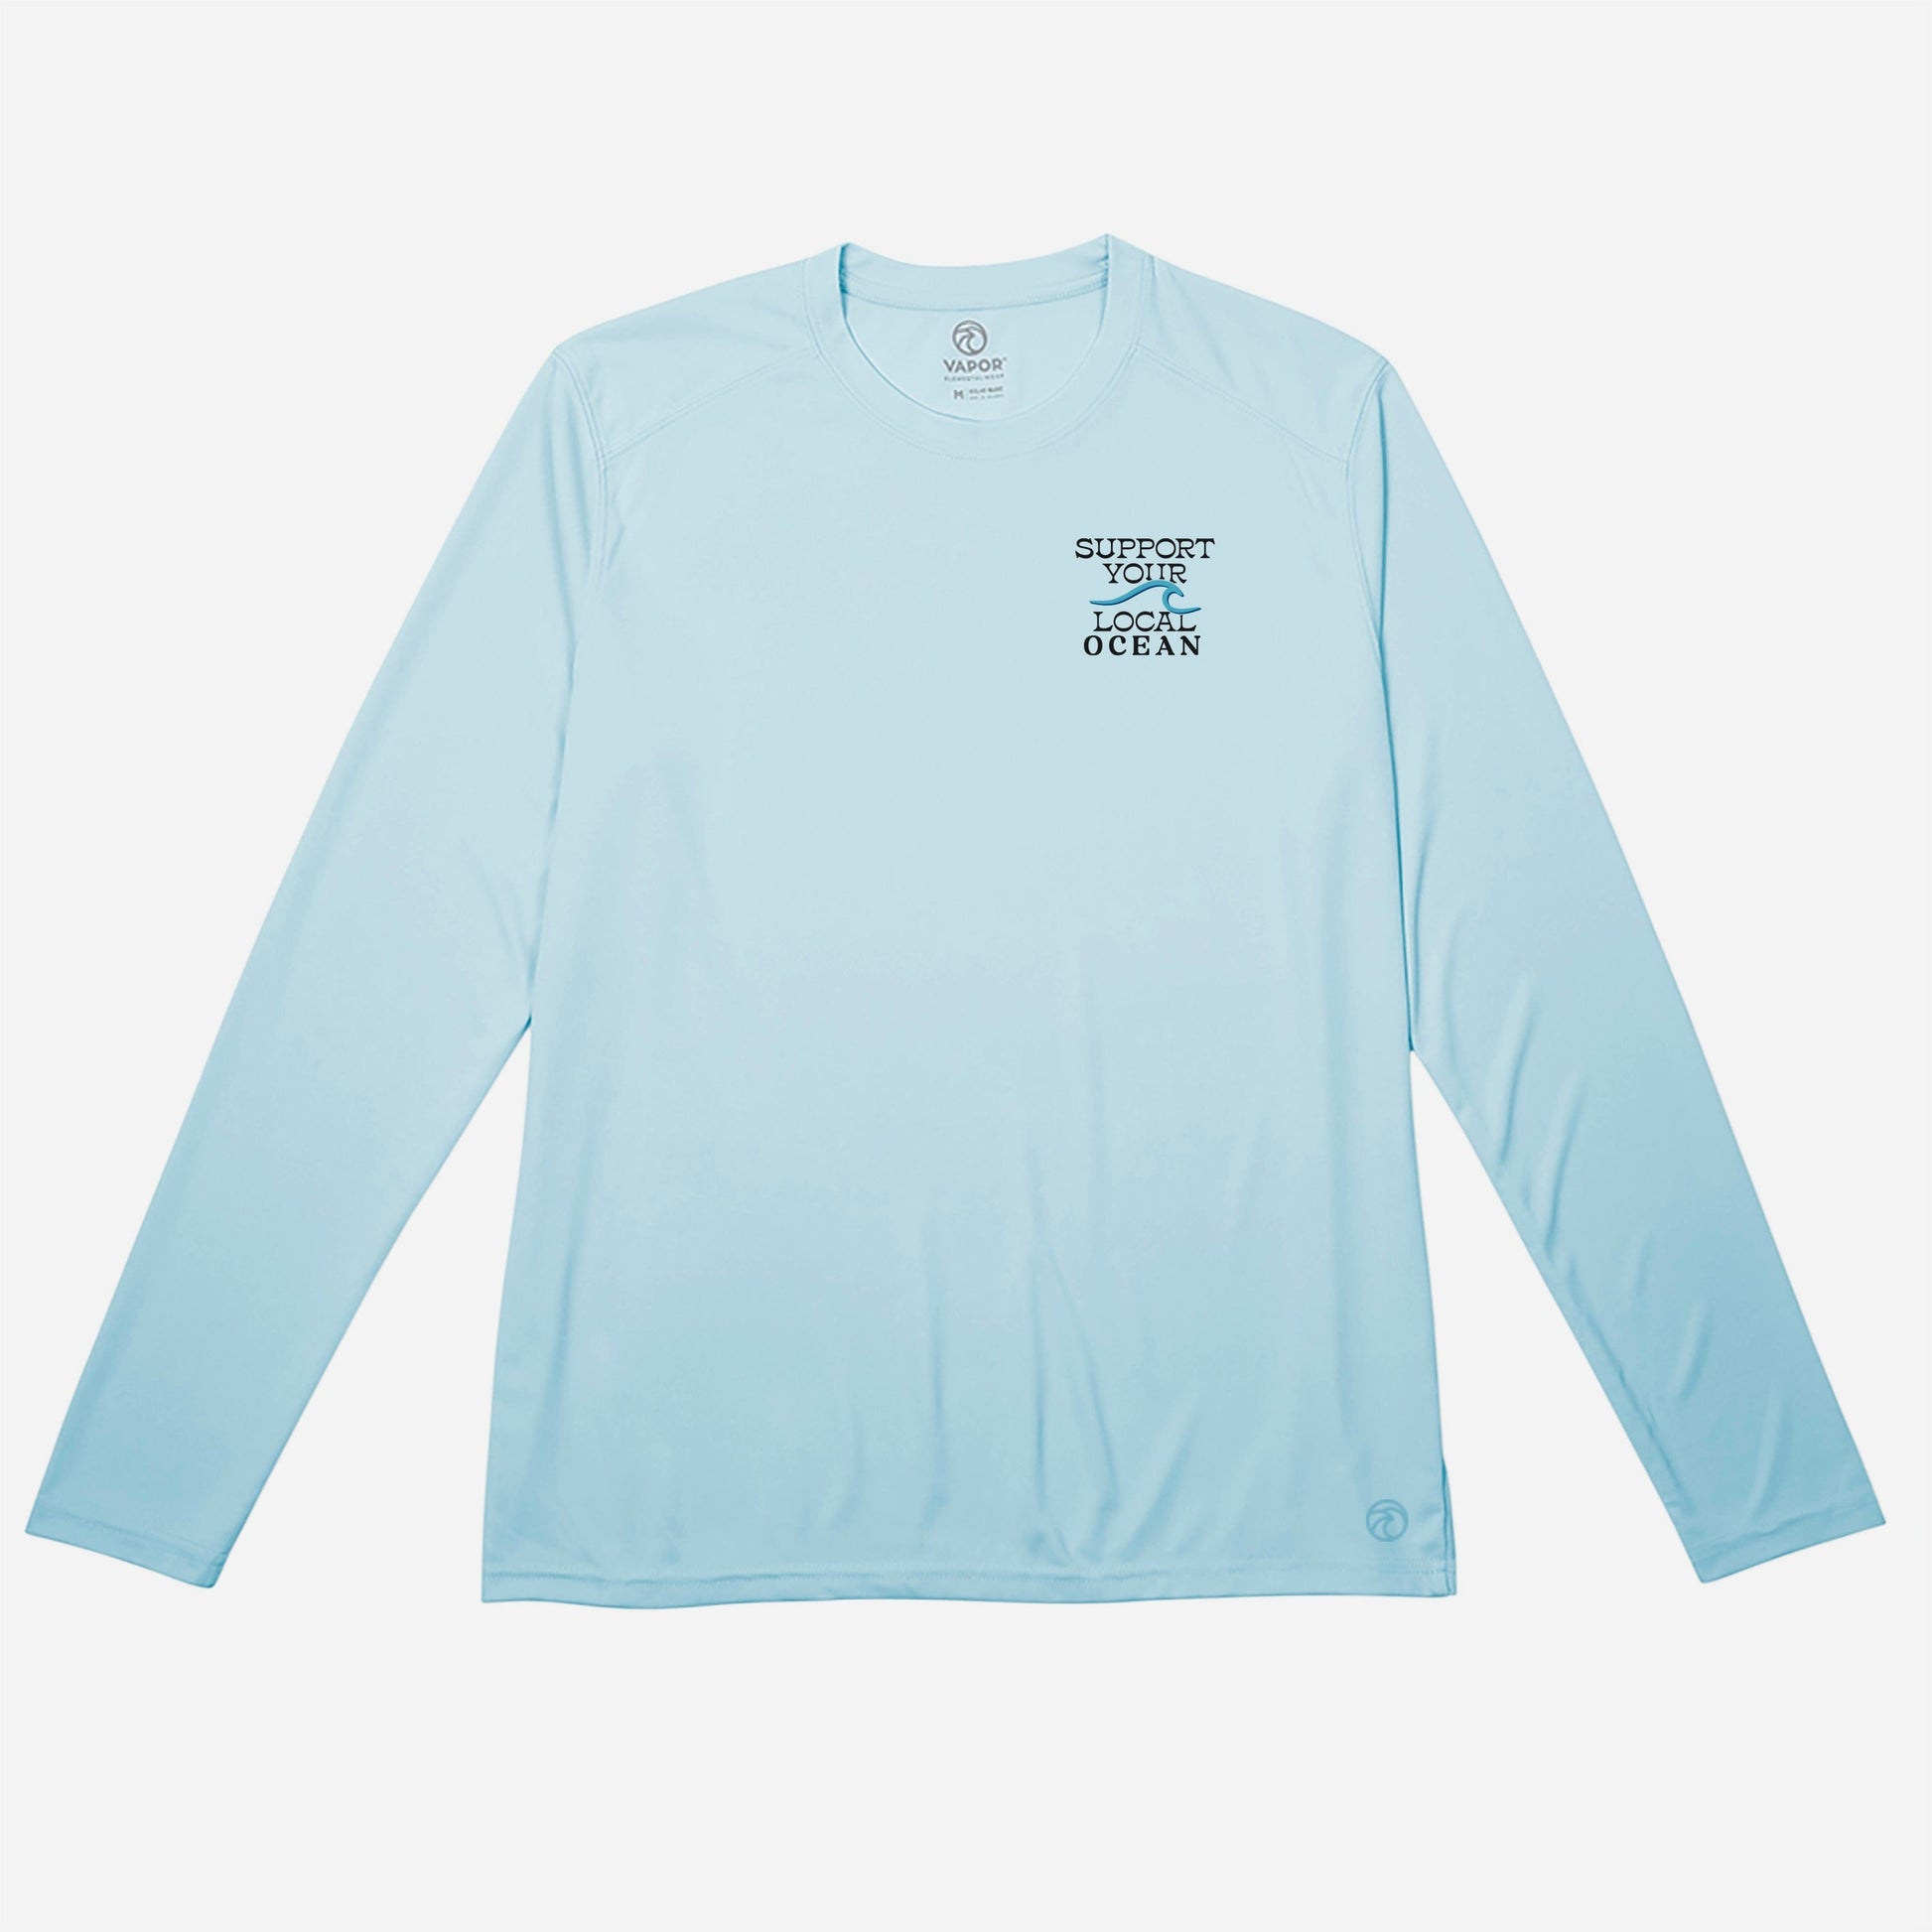 Support Your Local Ocean, UPF 50 Long Sleeve